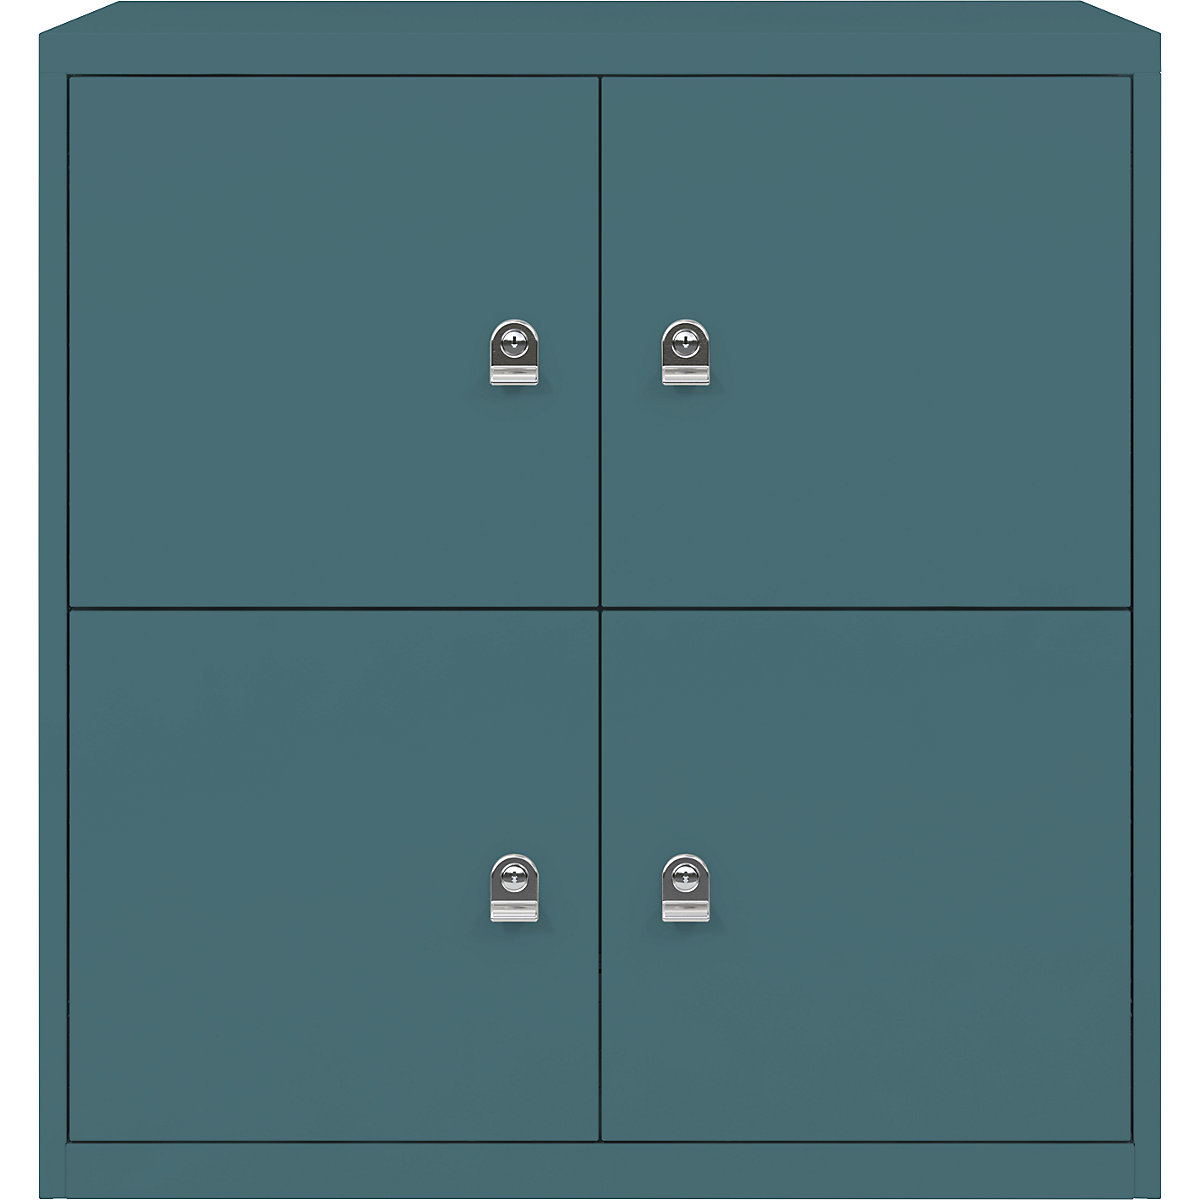 LateralFile™ lodge – BISLEY, with 4 lockable compartments, height 375 mm each, doulton